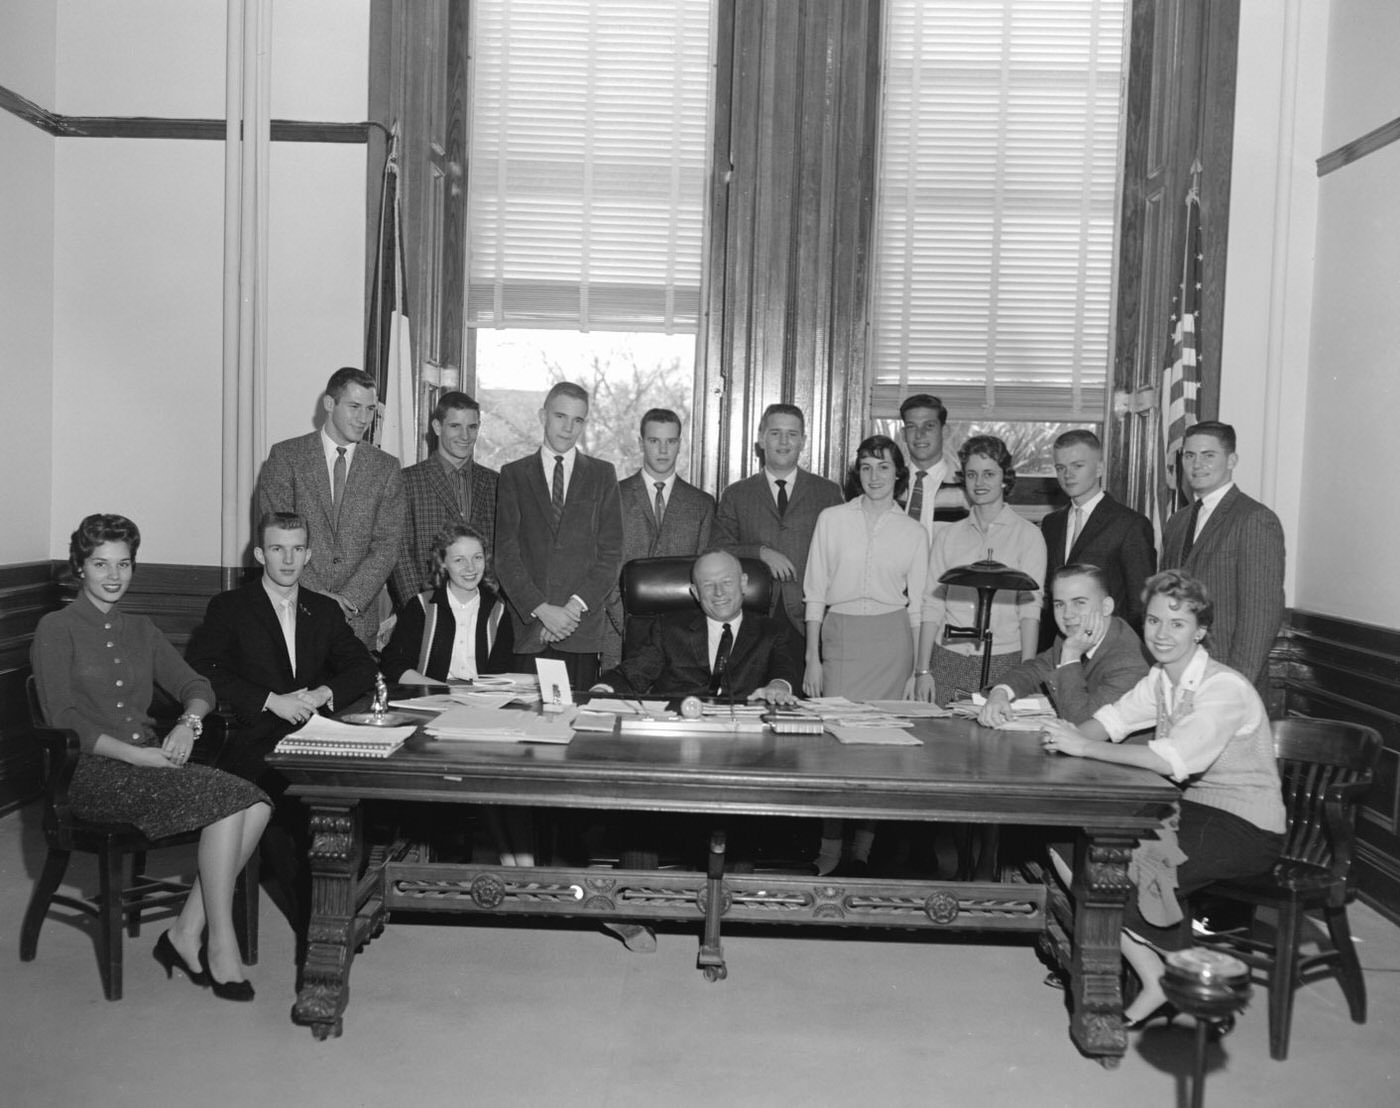 Group at YMCA with Man Seated at Center, 1958.